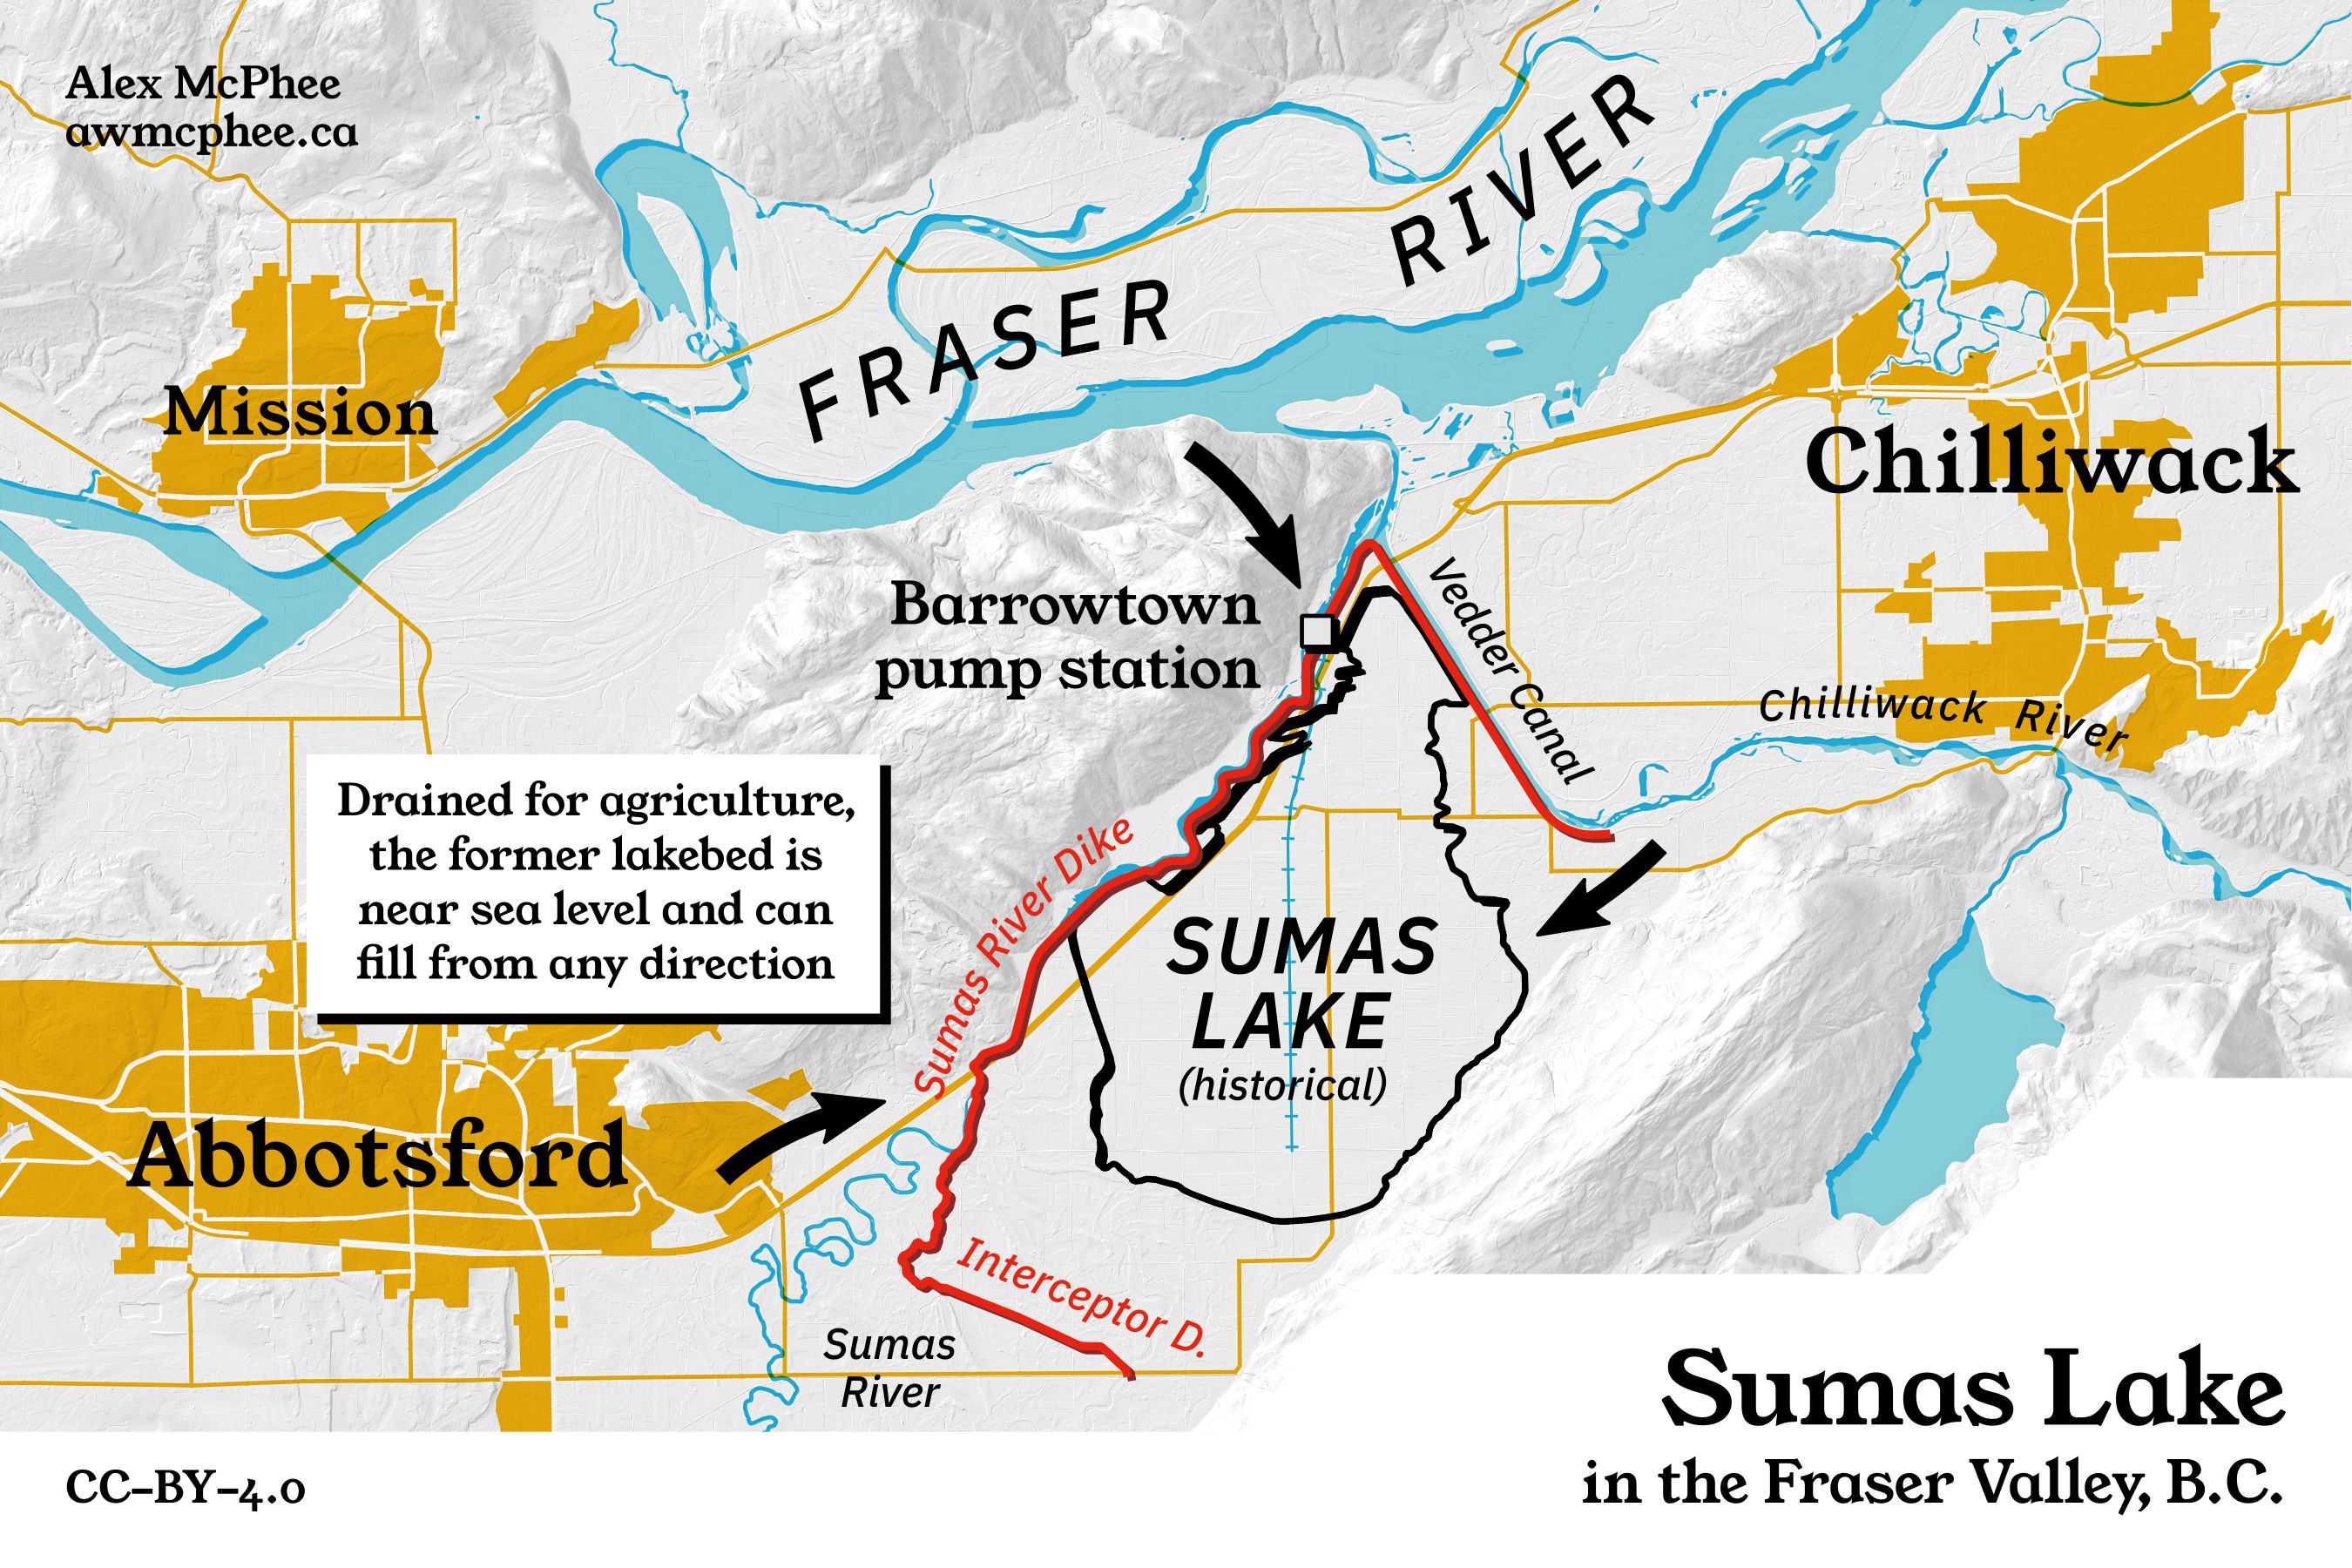 A map showing the Sumas Lake basin in the Fraser Valley, British Columbia.